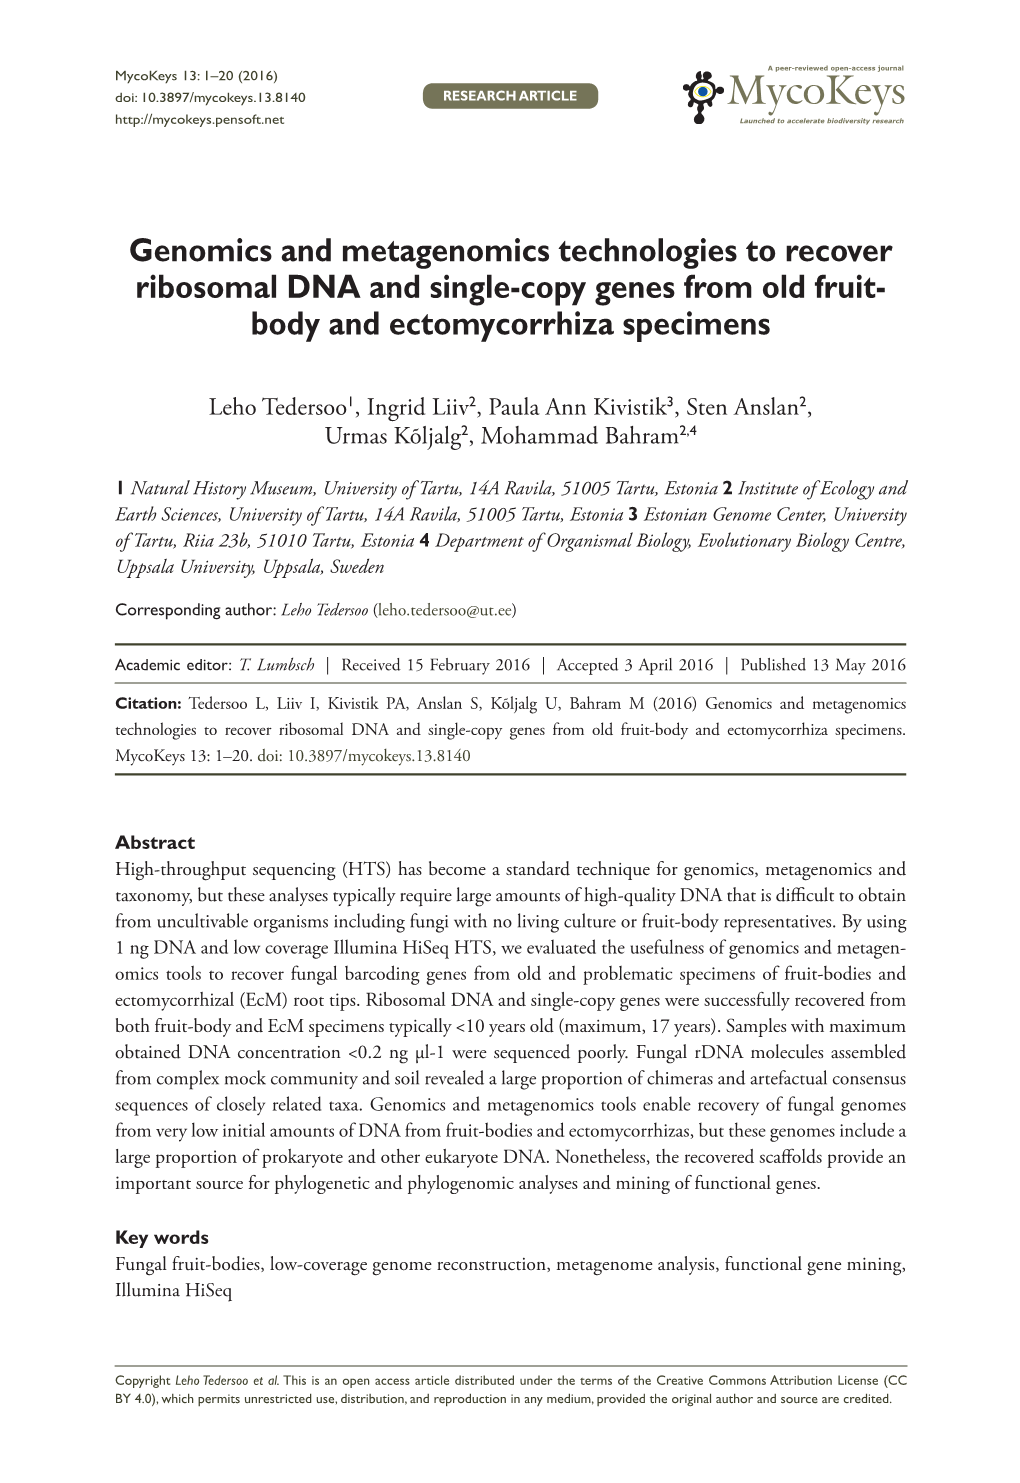 Genomics and Metagenomics Technologies to Recover Ribosomal DNA and Single-Copy Genes from Old Fruit- Body and Ectomycorrhiza Specimens